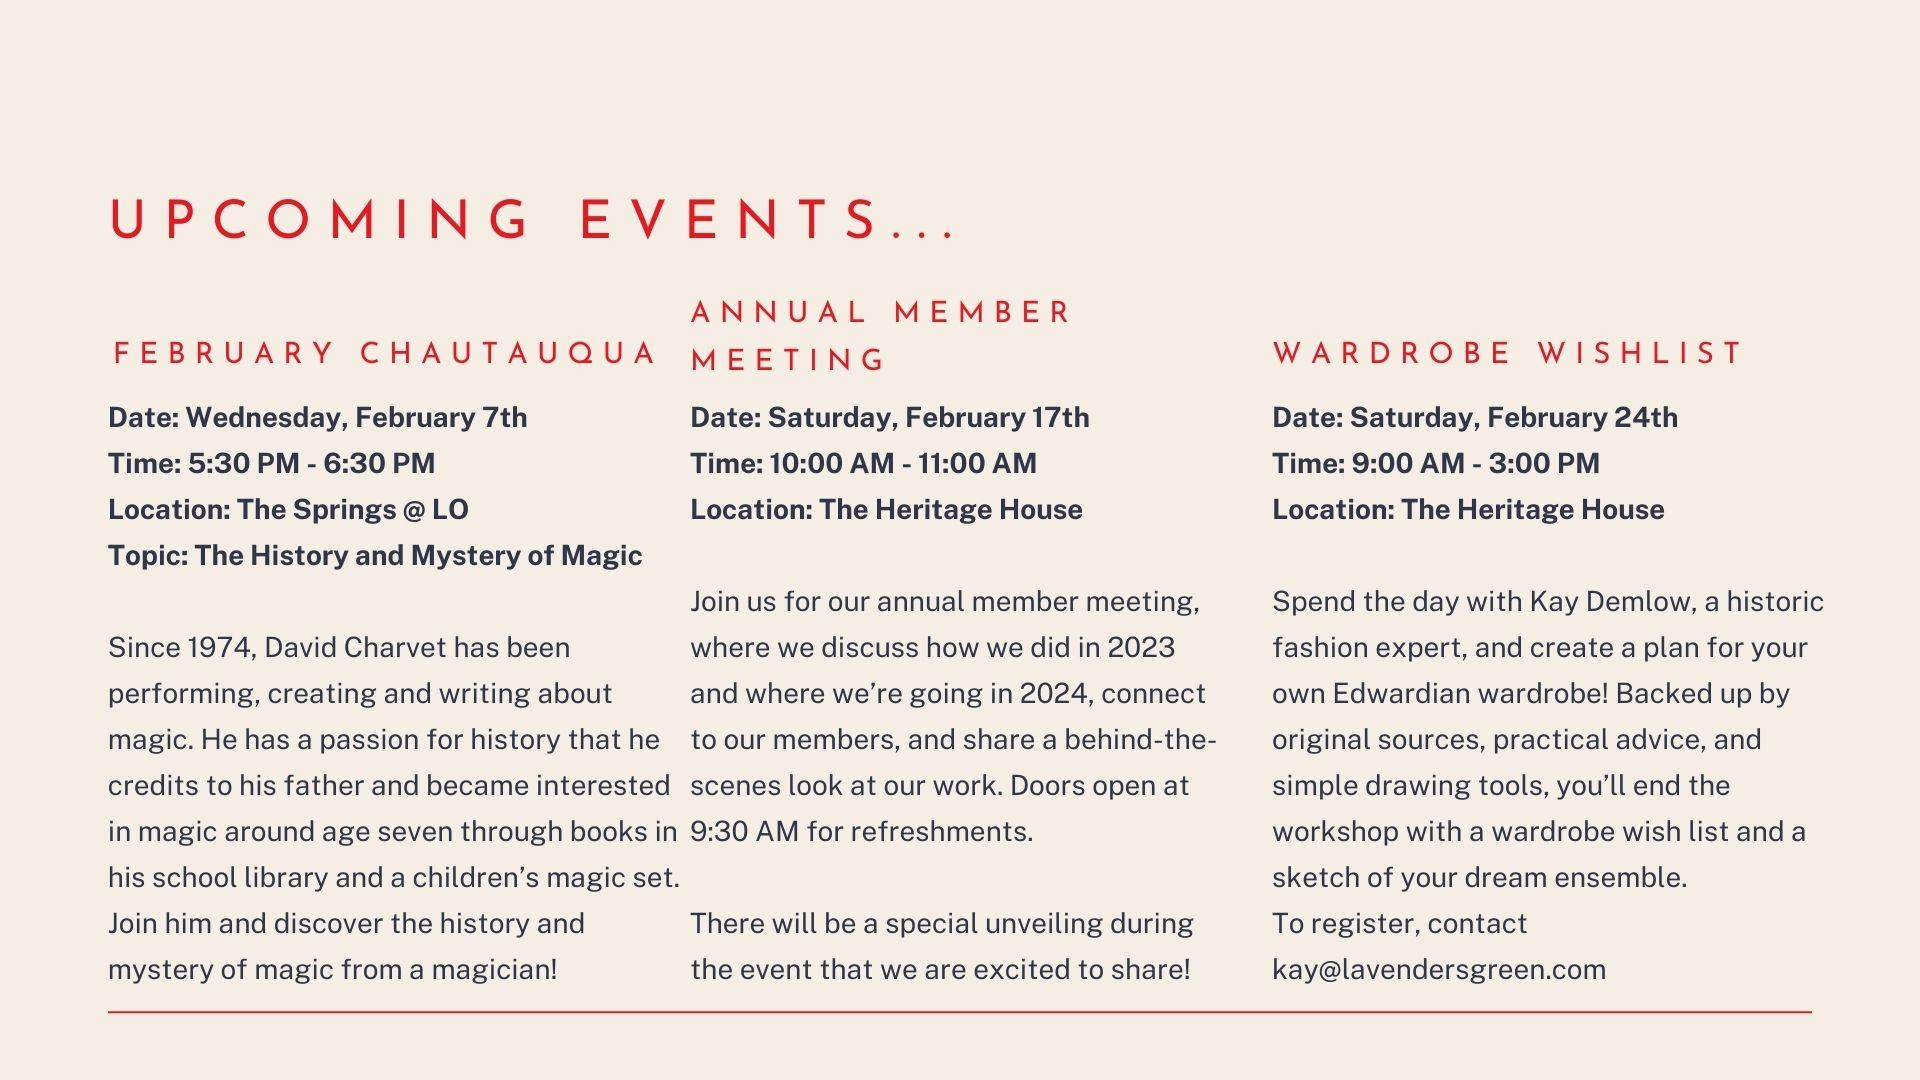 Upcoming events include February Chautauqua, Annual Member Meeting, and Wardrobe Wishlist